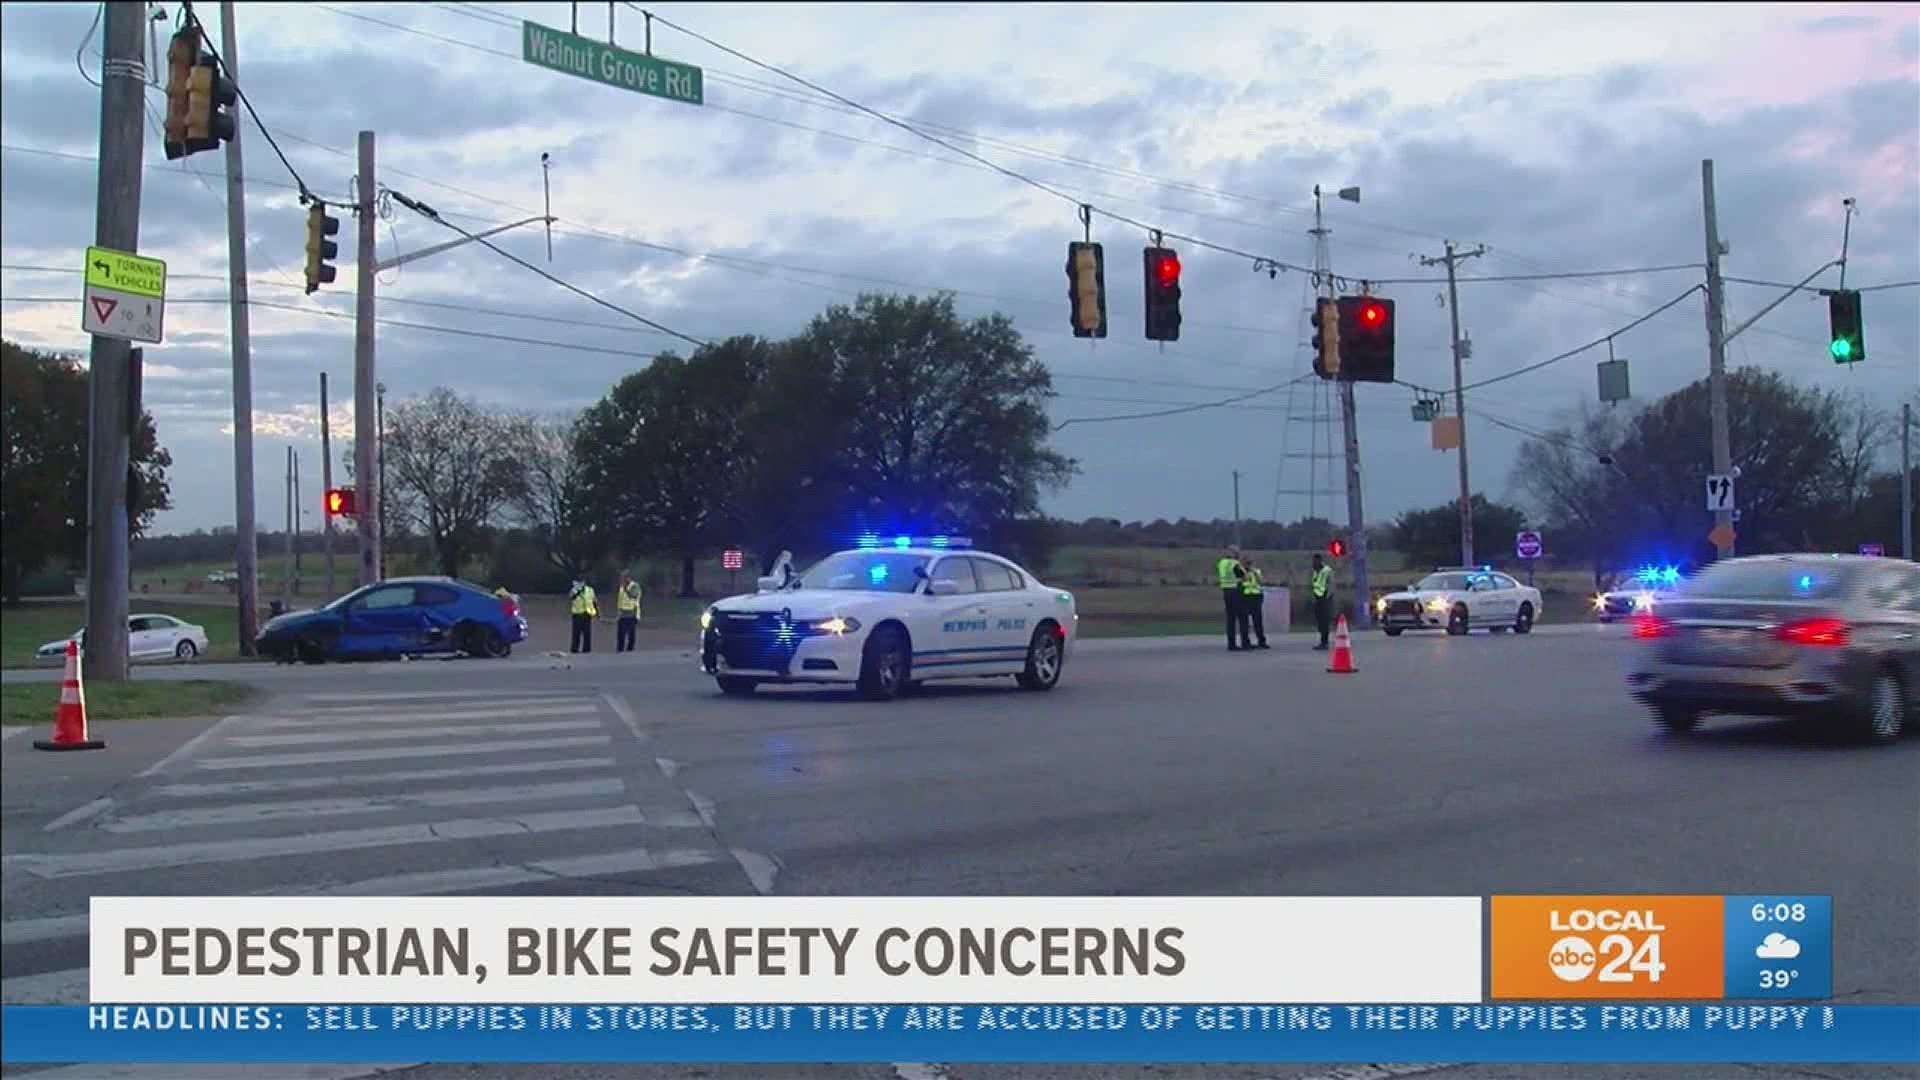 In 2020, more people were killed while walking, jogging or biking on streets in Shelby County.